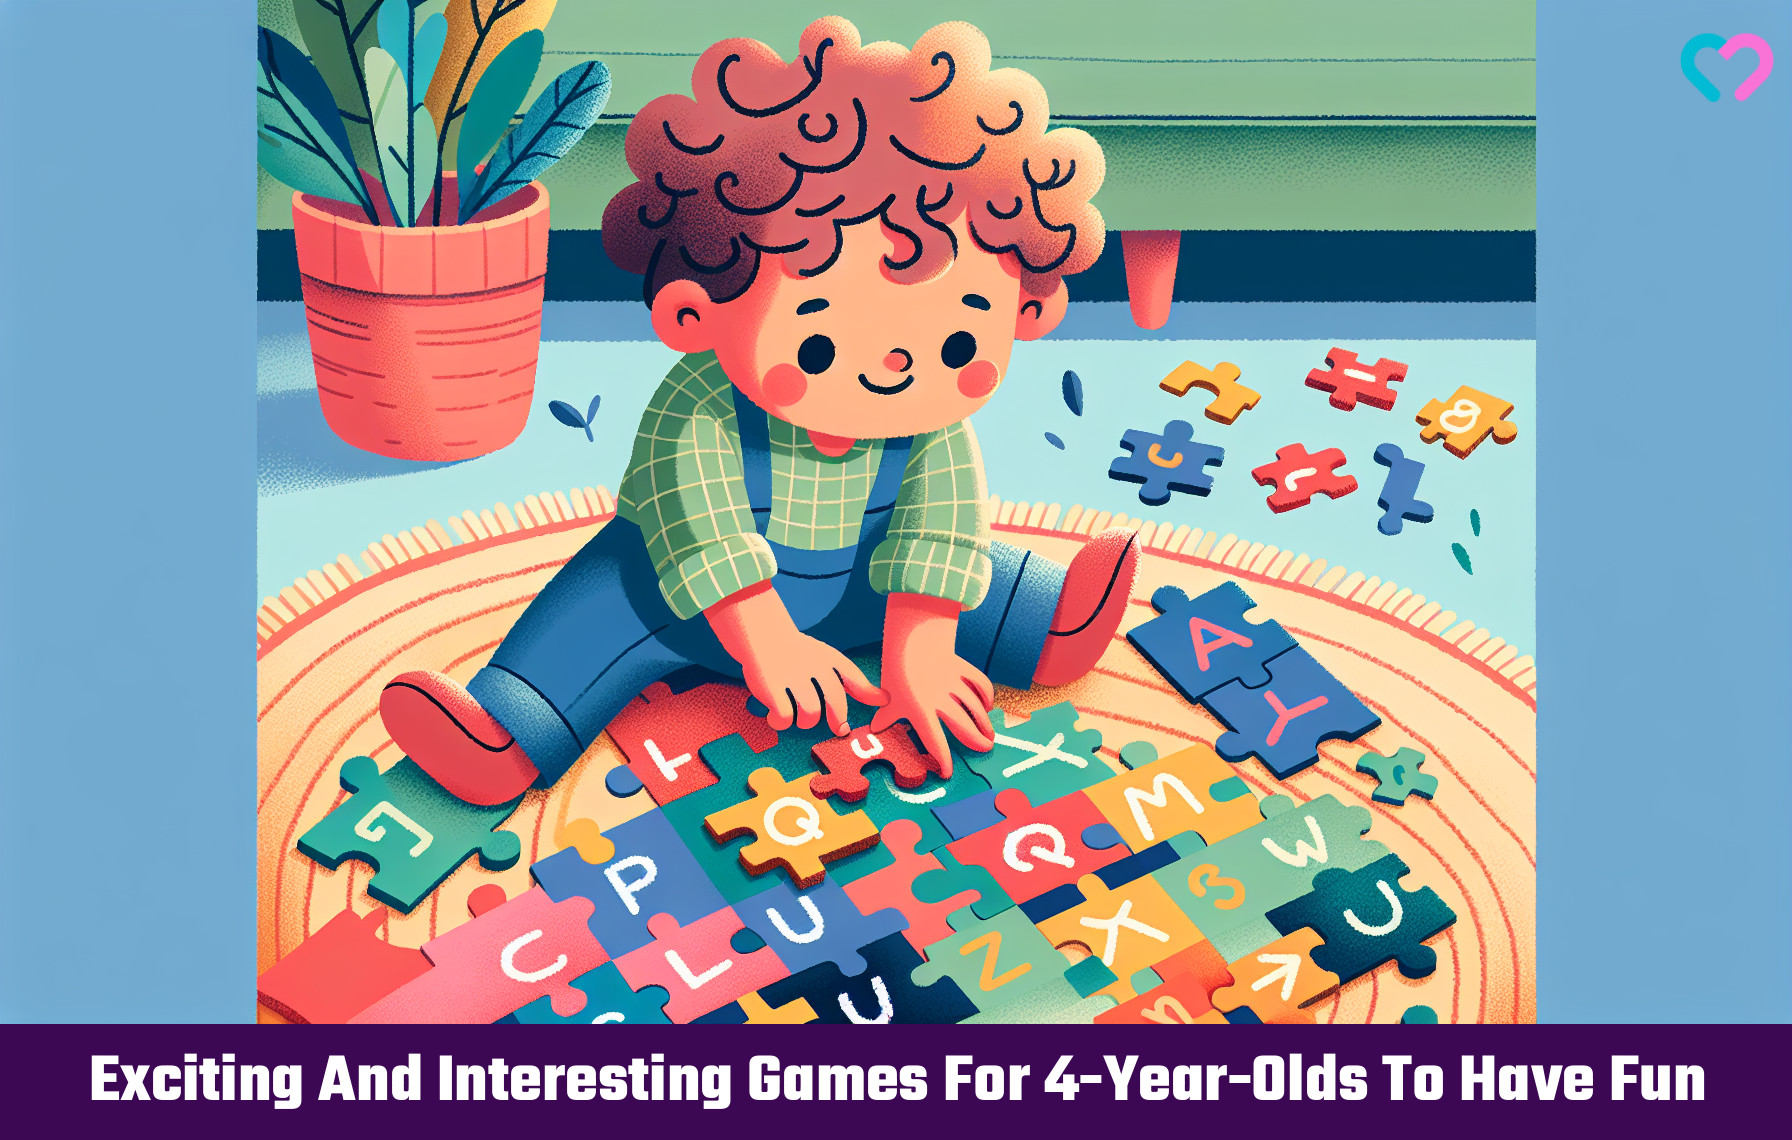 Exciting And Interesting Games For 4-Year-Olds To Have Fun_illustration